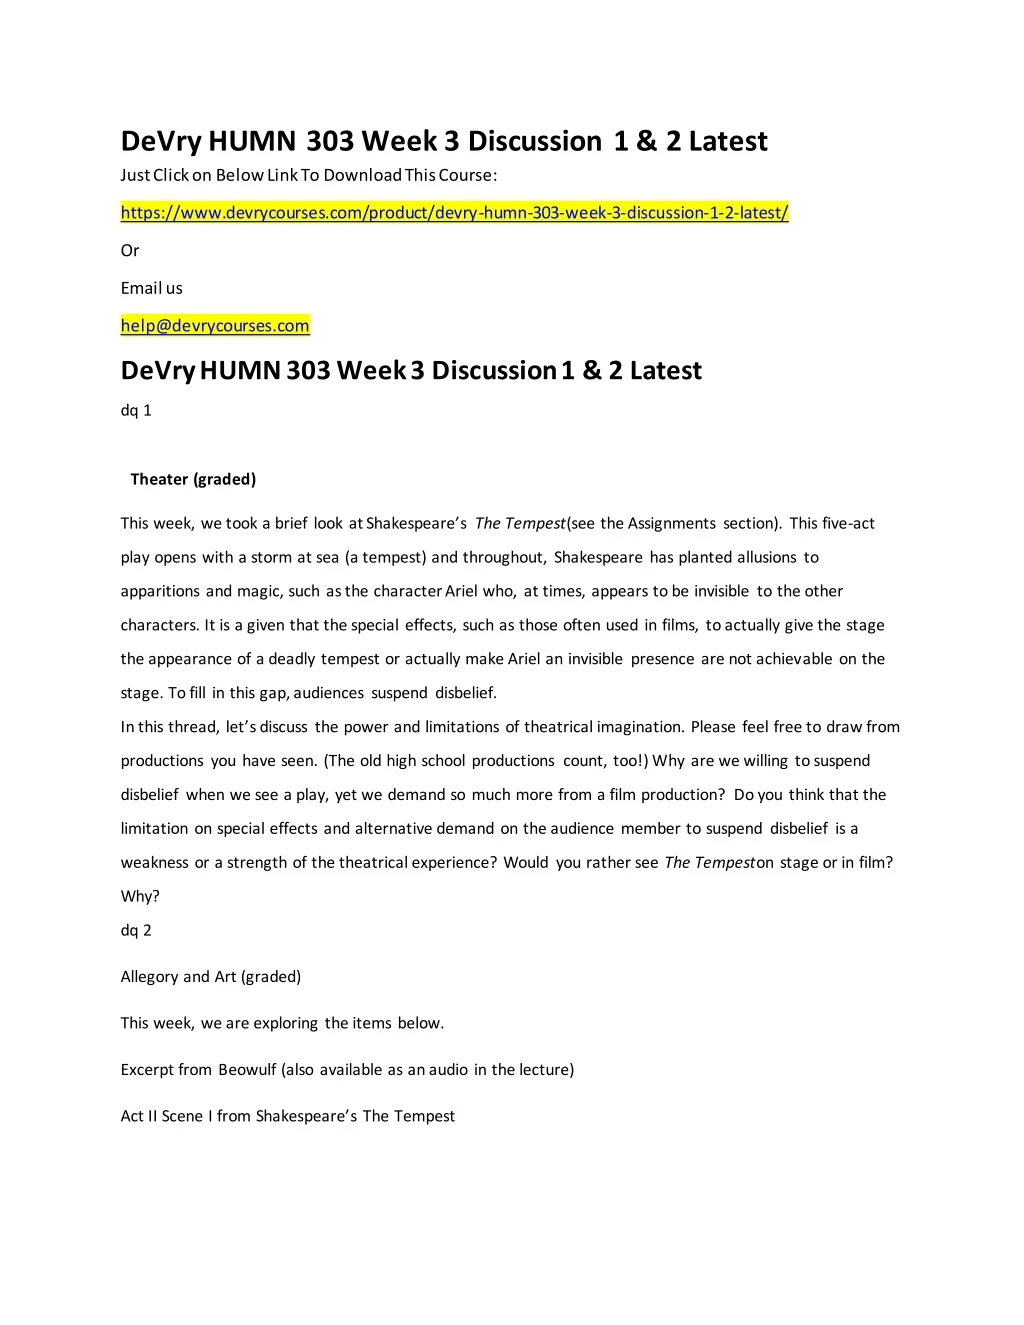 devry humn 303 week 3 discussion 1 2 latest just